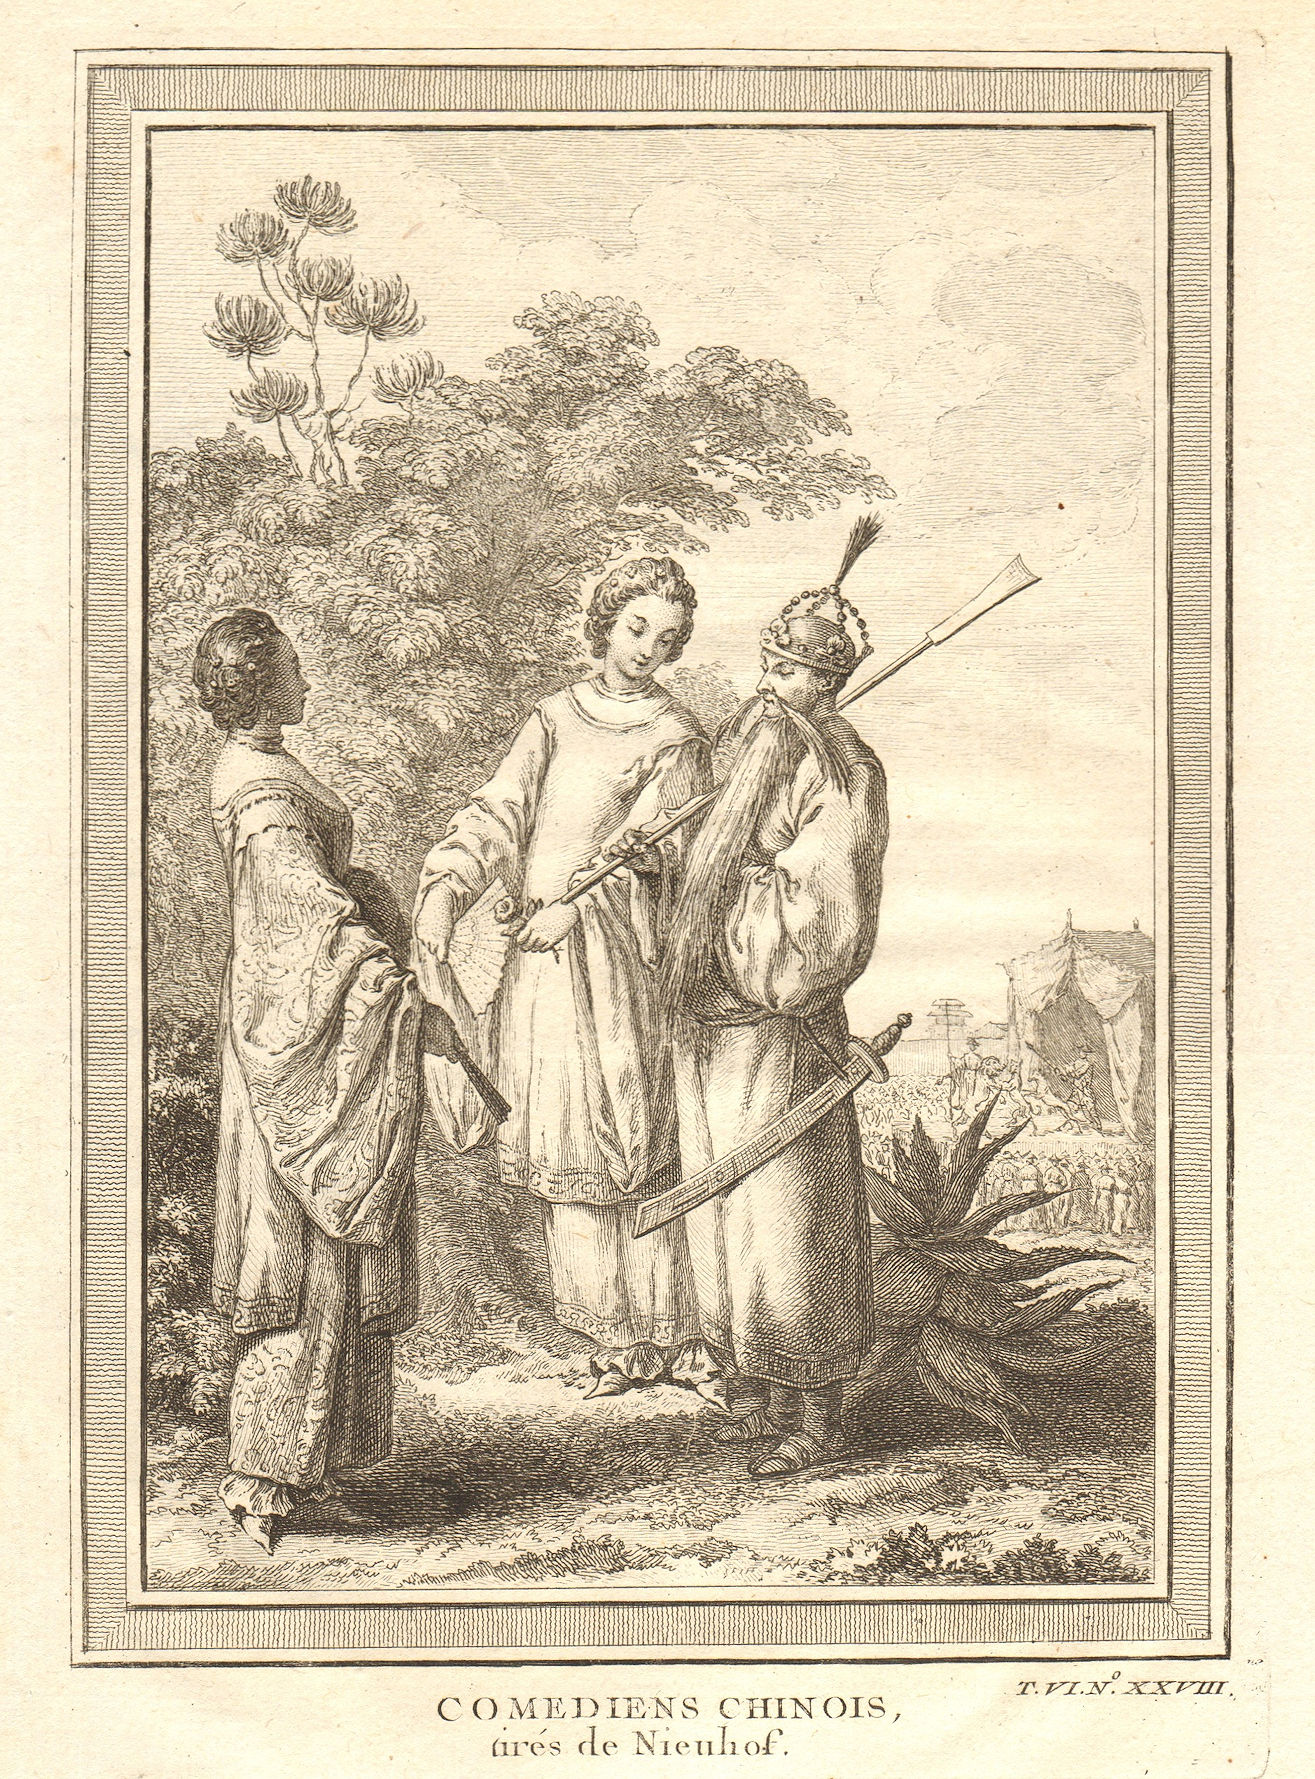 Associate Product 'Comediens Chinois'. China. Chinese comedians or actors. Nieuhof 1748 print